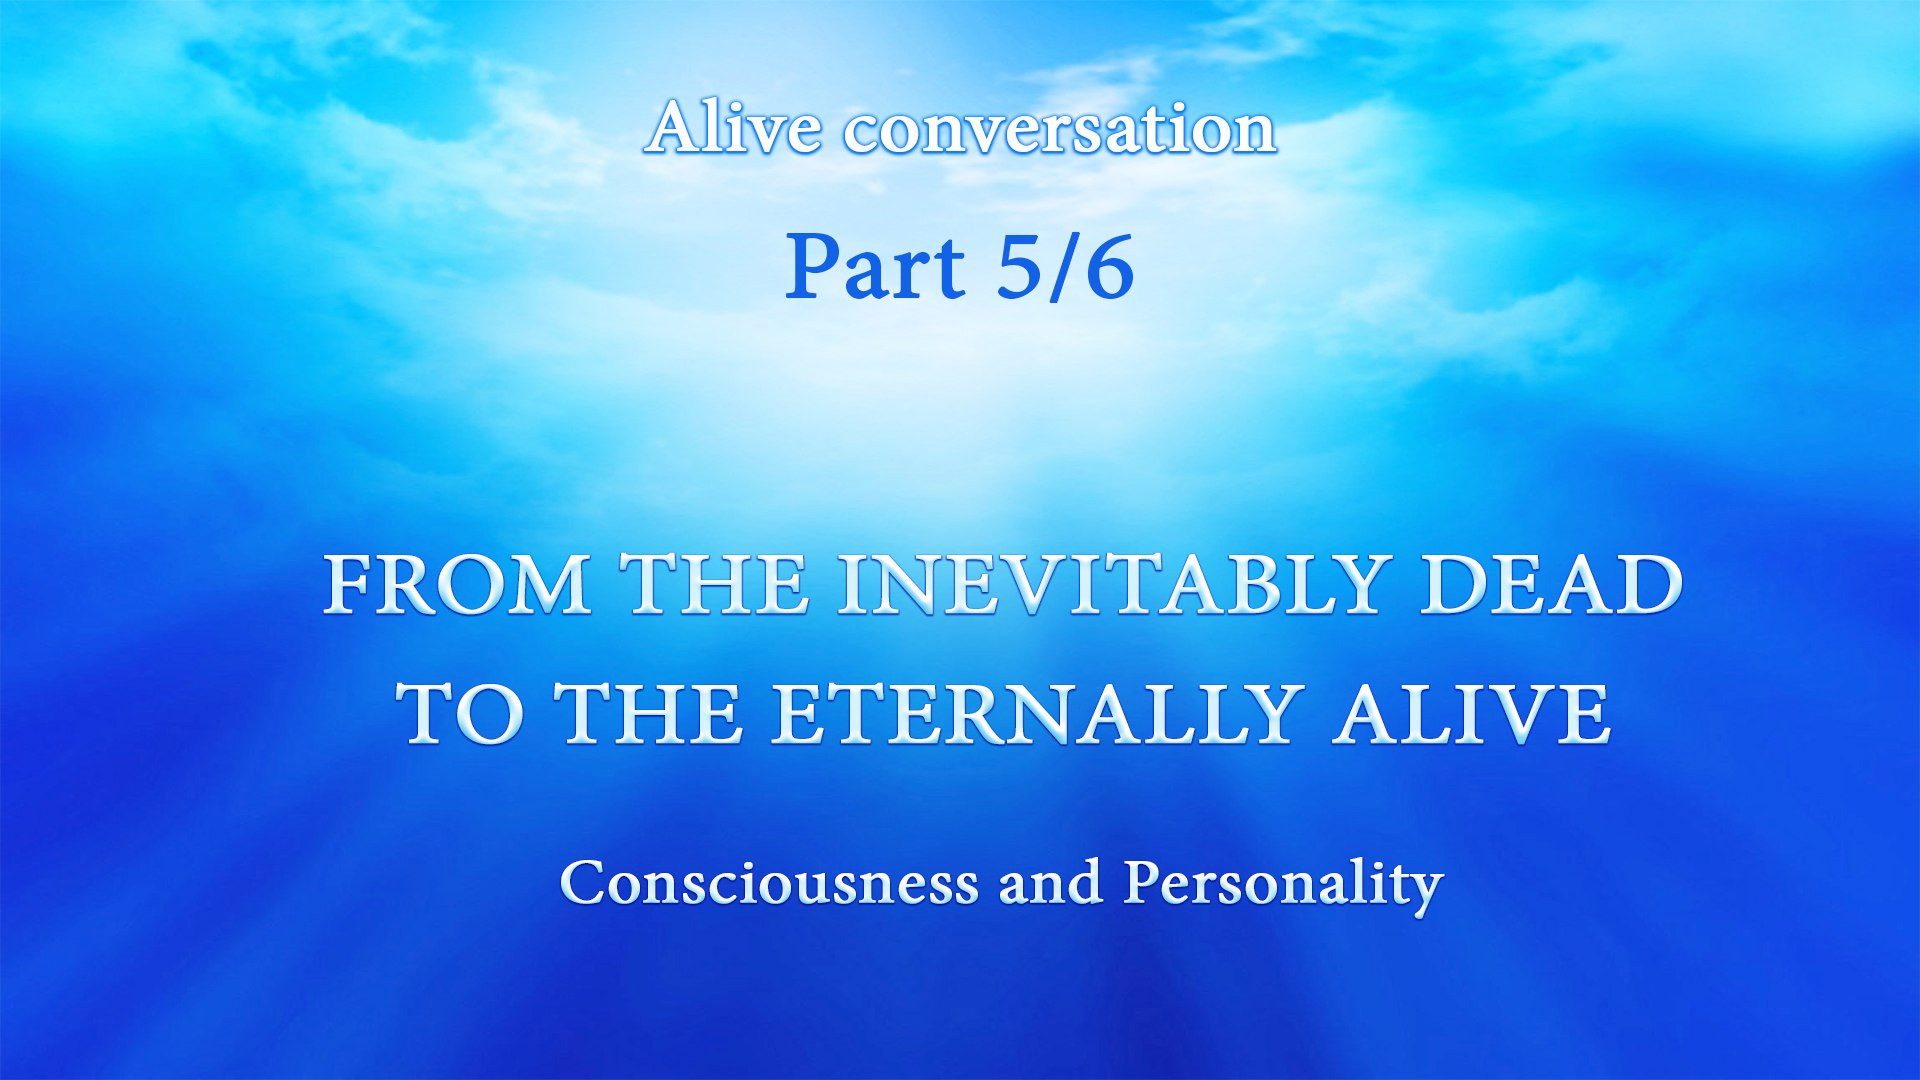 CONSCIOUSNESS AND PERSONALITY. Part 5/6 | From the Inevitably Dead to the Eternally Alive